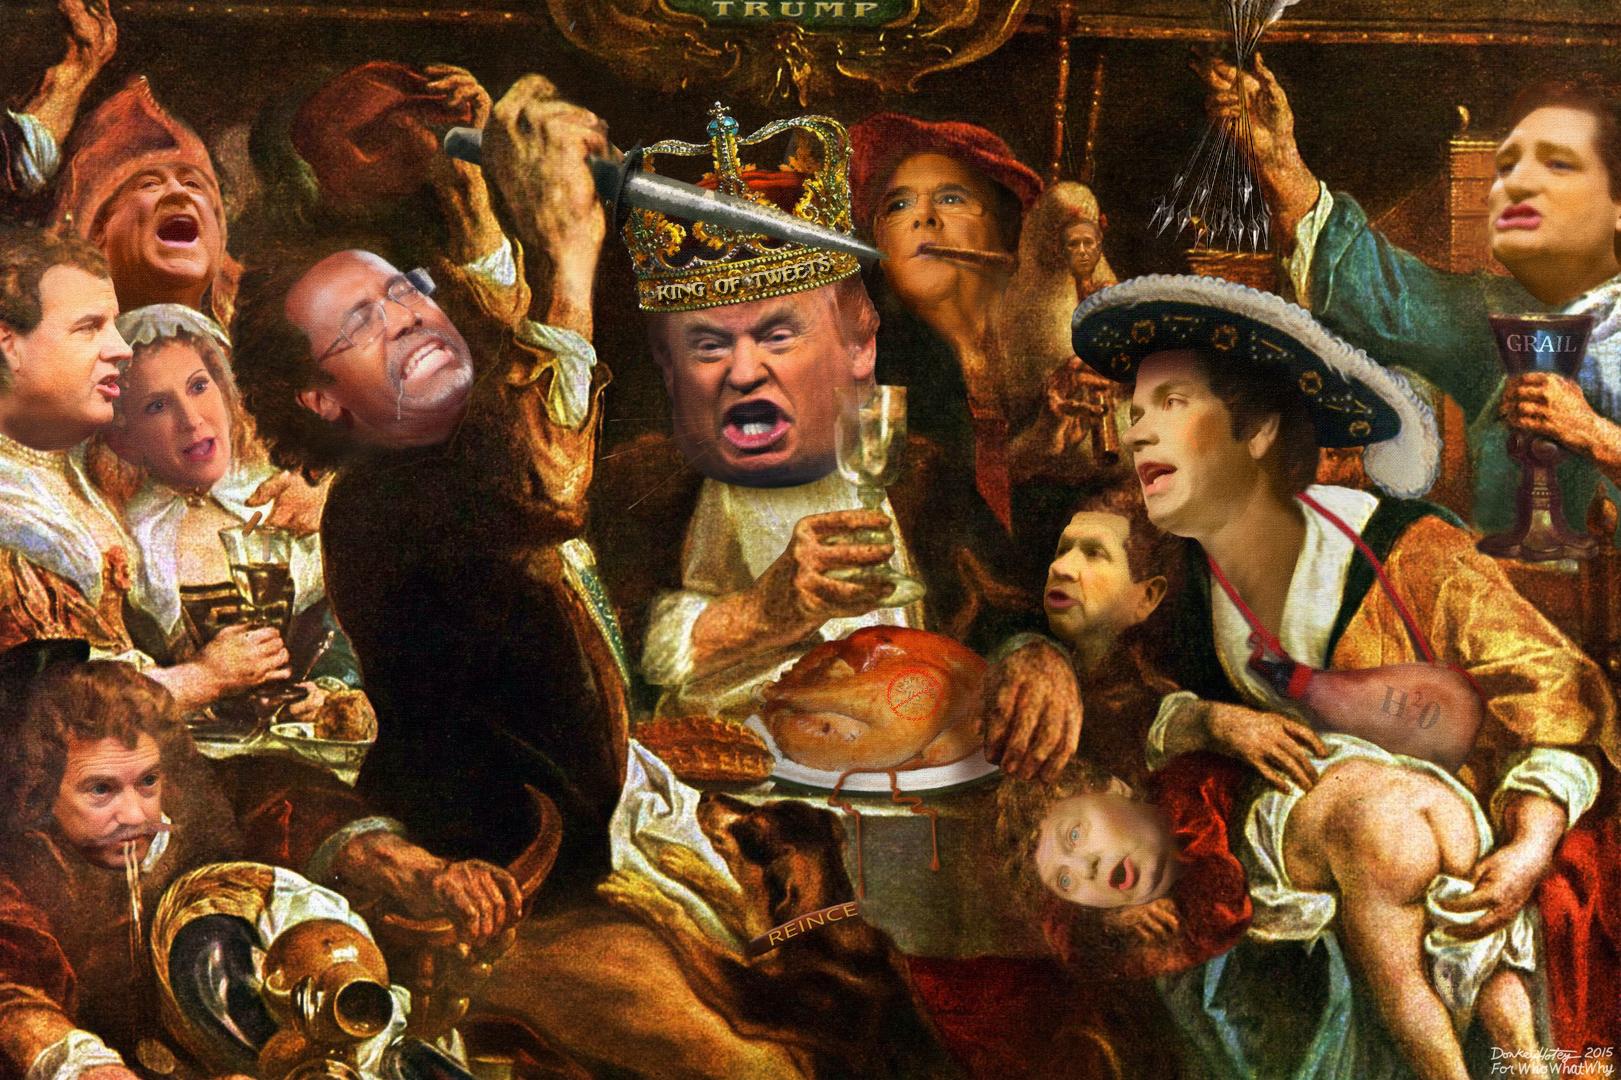 Thanksgiving Feast at Trump Castle. Photo credit: Adapted for WhoWhatWhy by DonkeyHotey from a 17th century painting by Jacob Jordaens titled “The King Drinks” available via Wikimedia. Other images used in this adaptation are listed below.